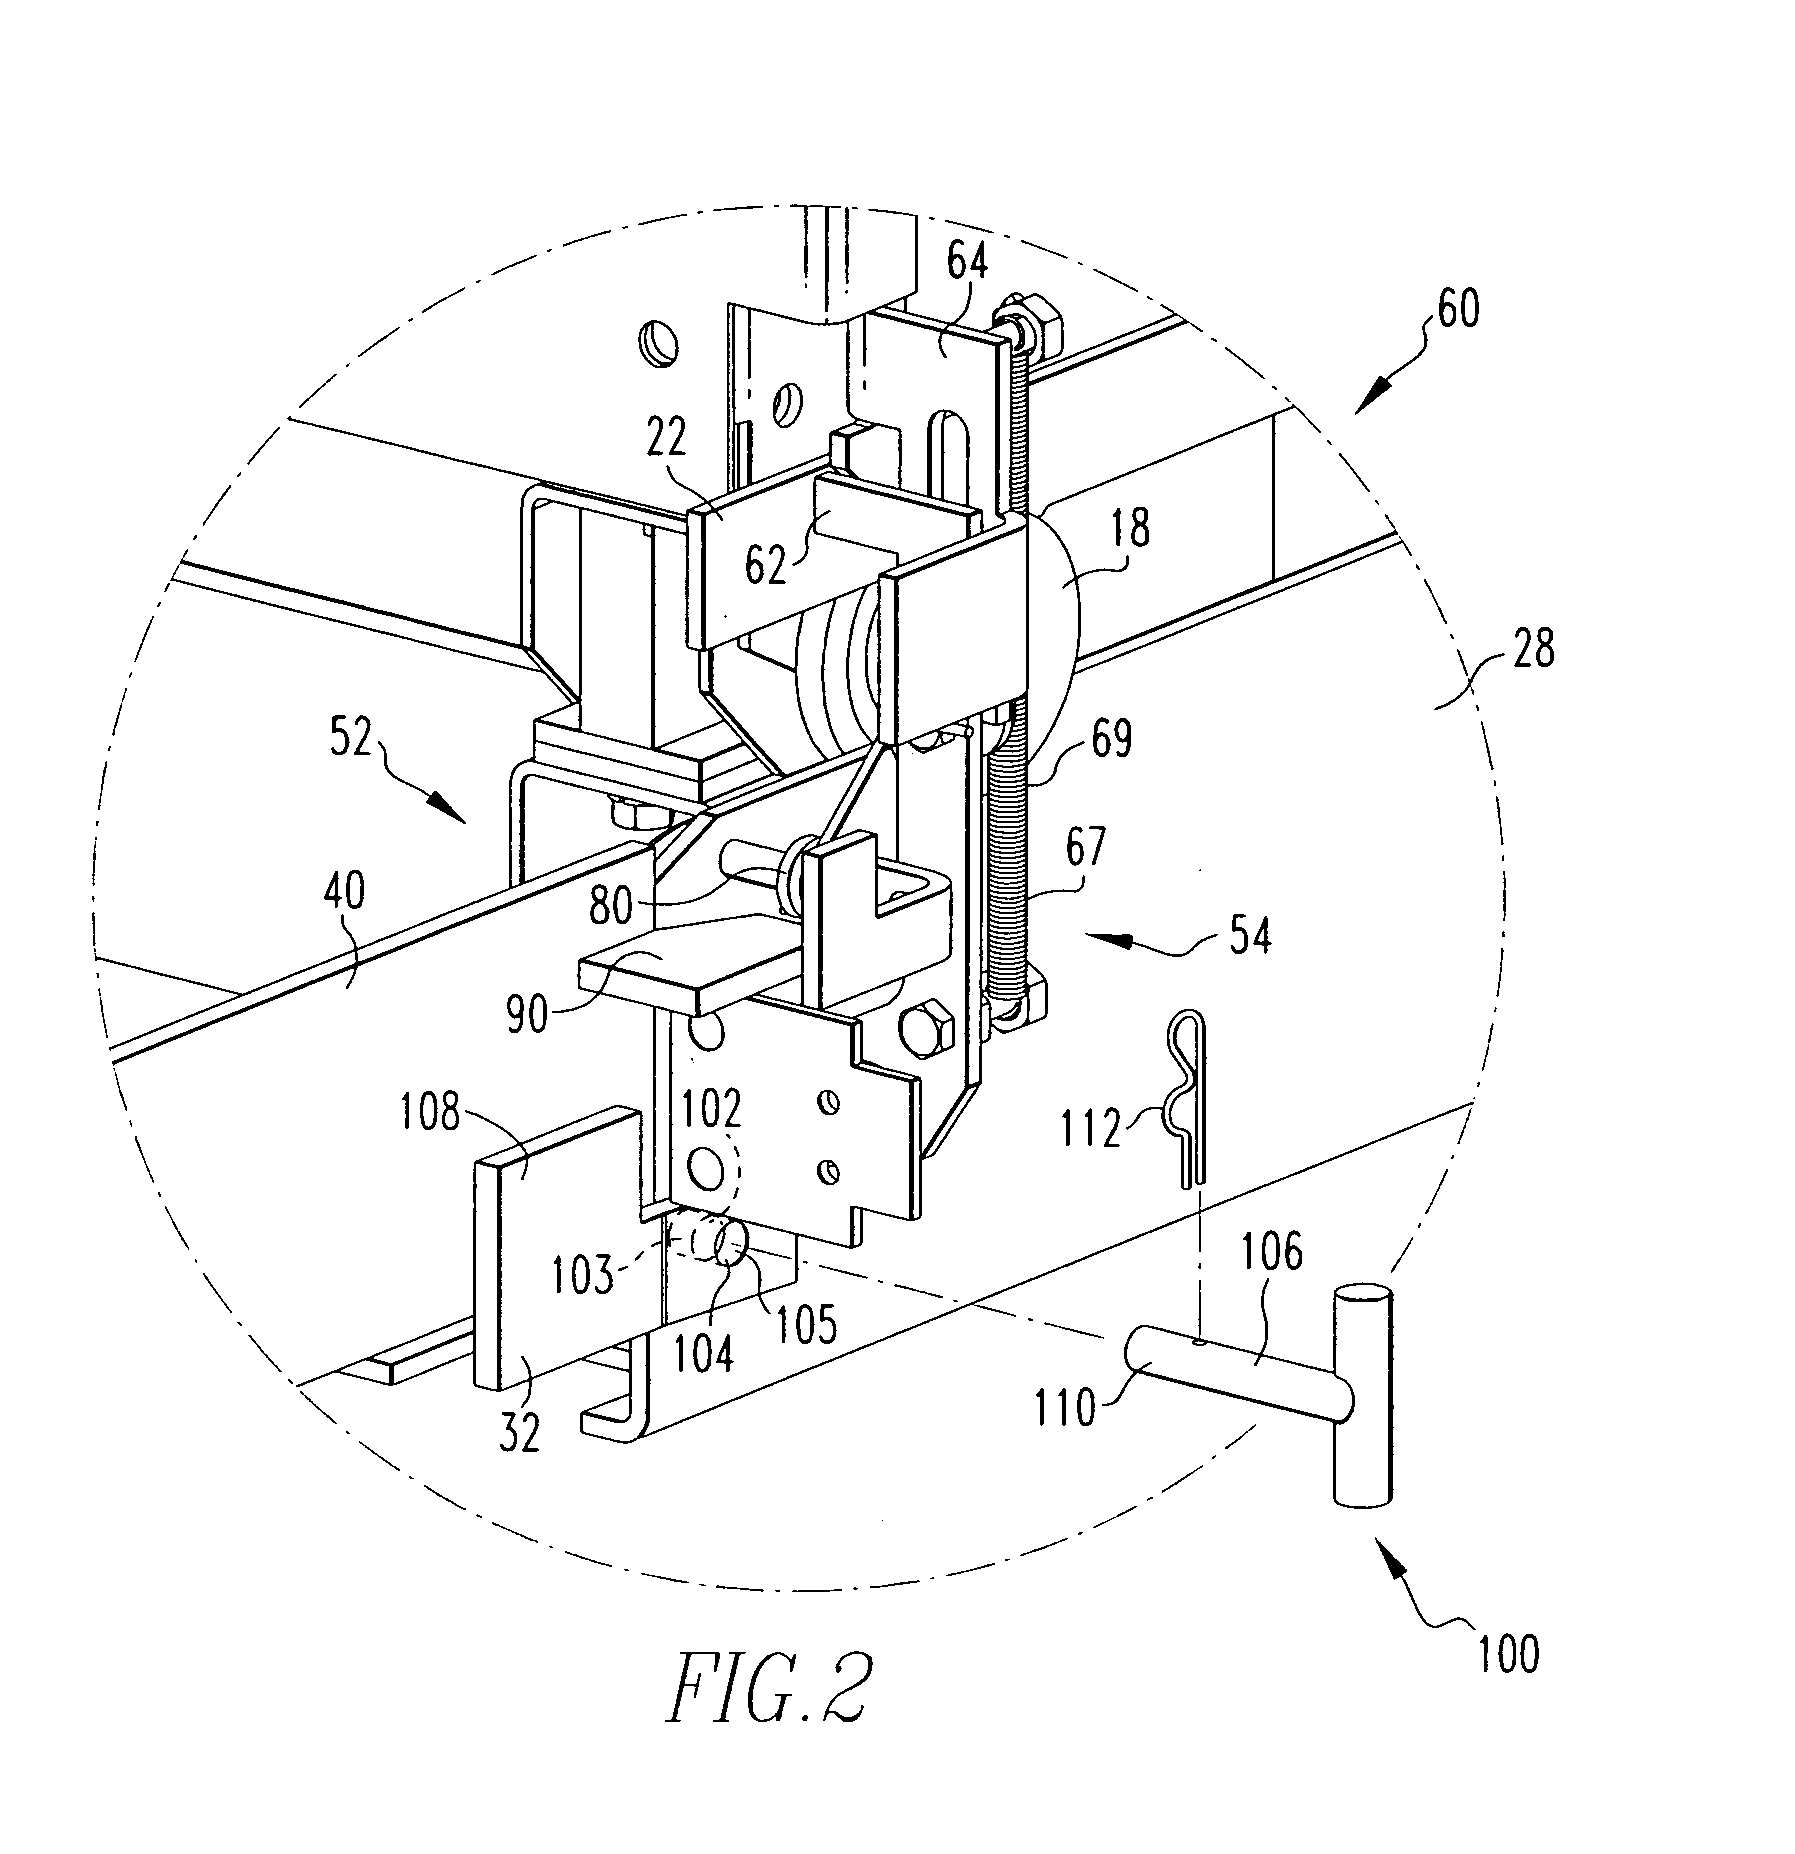 Safety interlock for circuit breaker housing assembly and extraction device